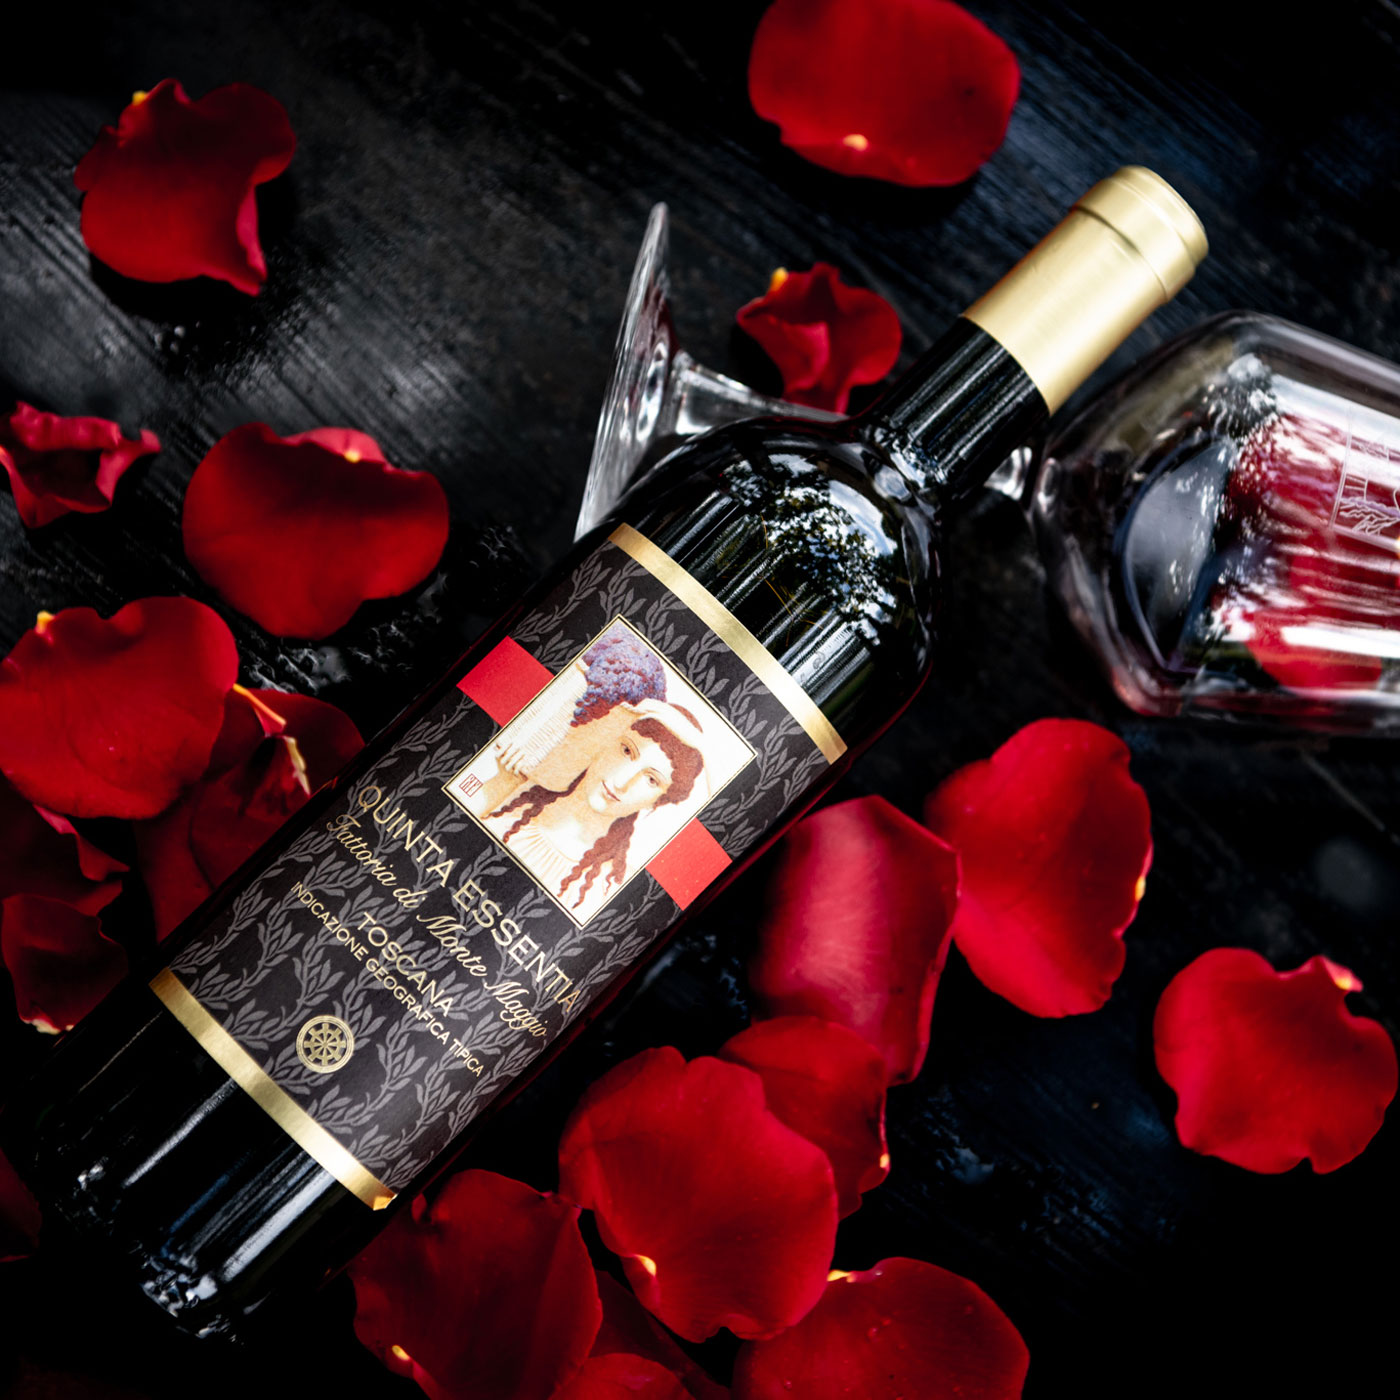 Quinta Essentia di Montemaggio is a blend of our best Merlot and best Sangiovese